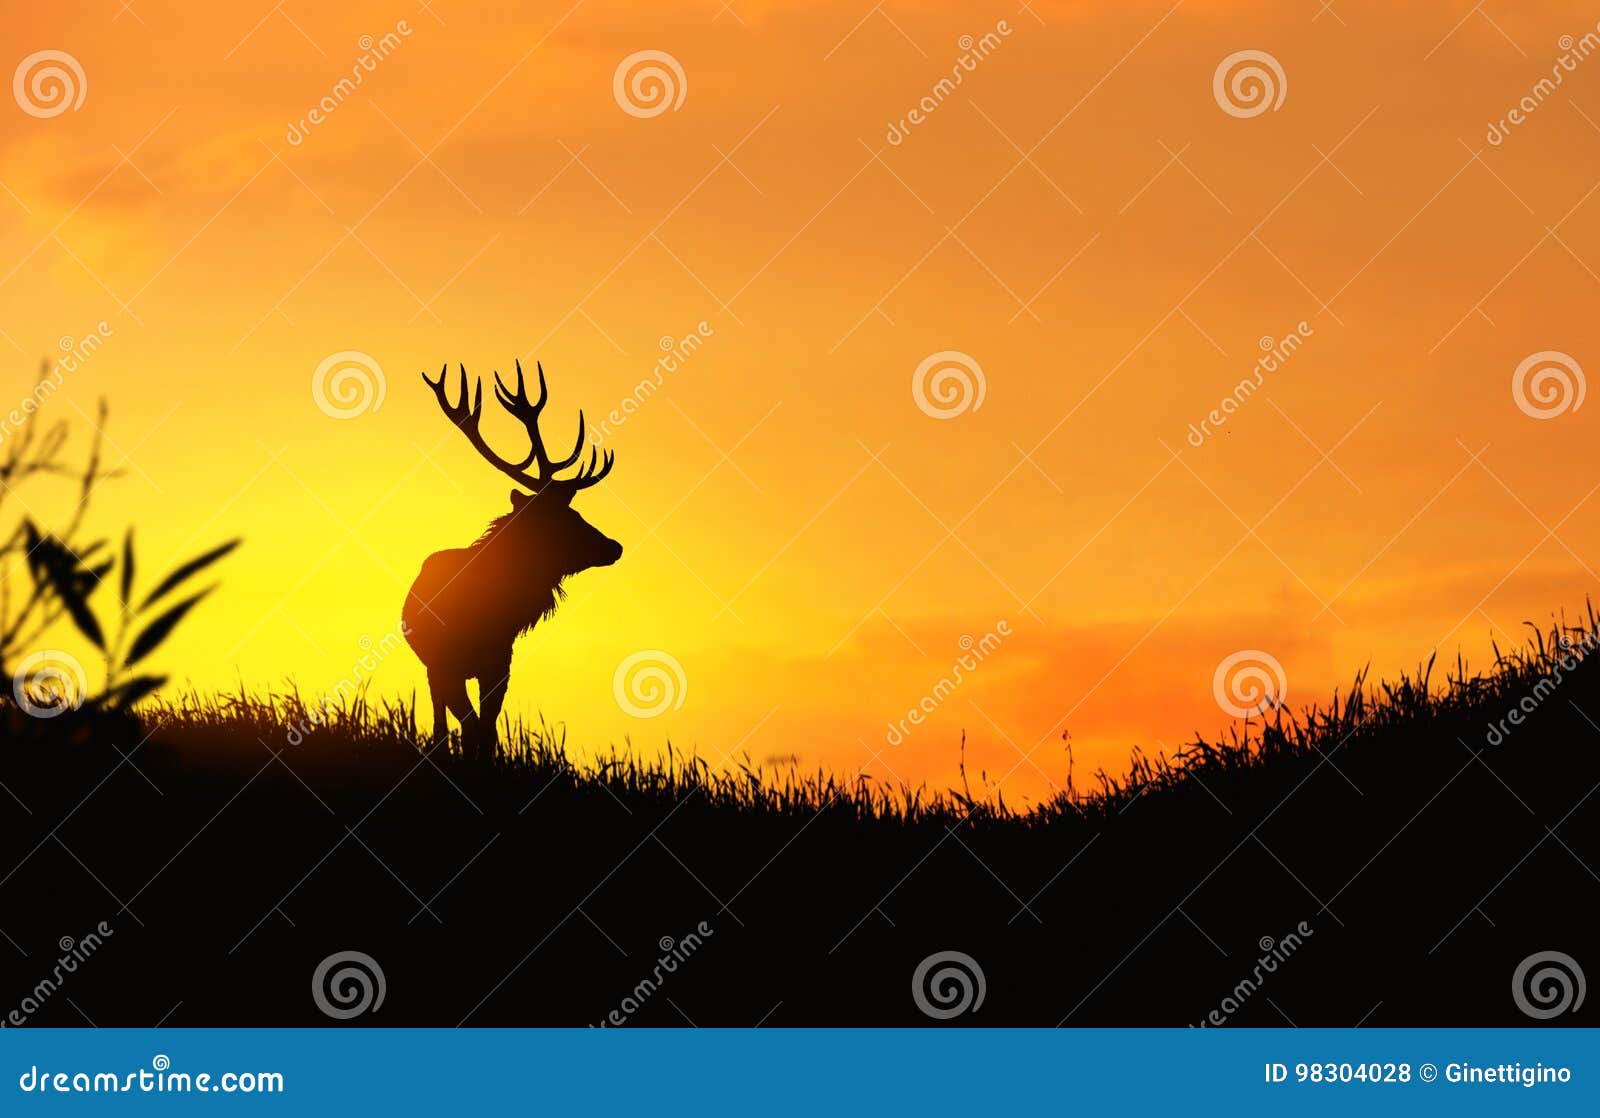 Silhouette of deer on grass field during sunset photo – Free